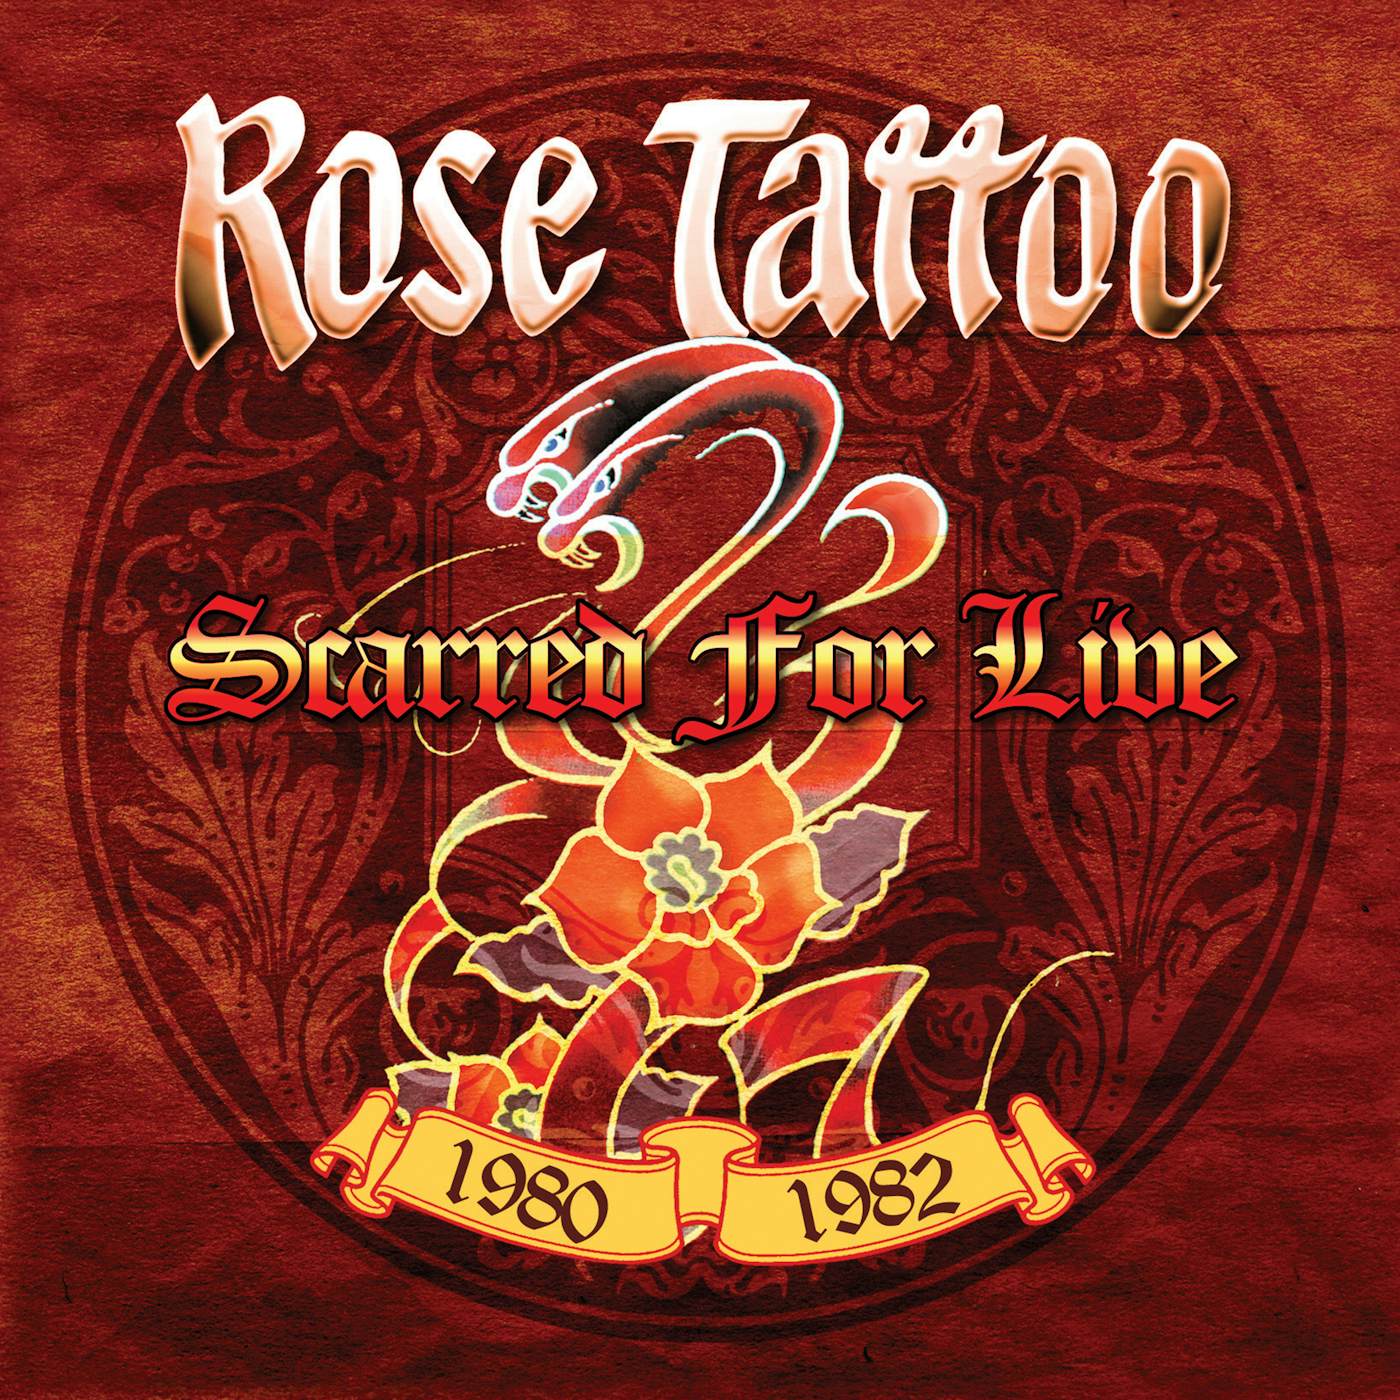 Rose Tattoo SCARRED FOR LIVE - 1980-1982 Vinyl Record